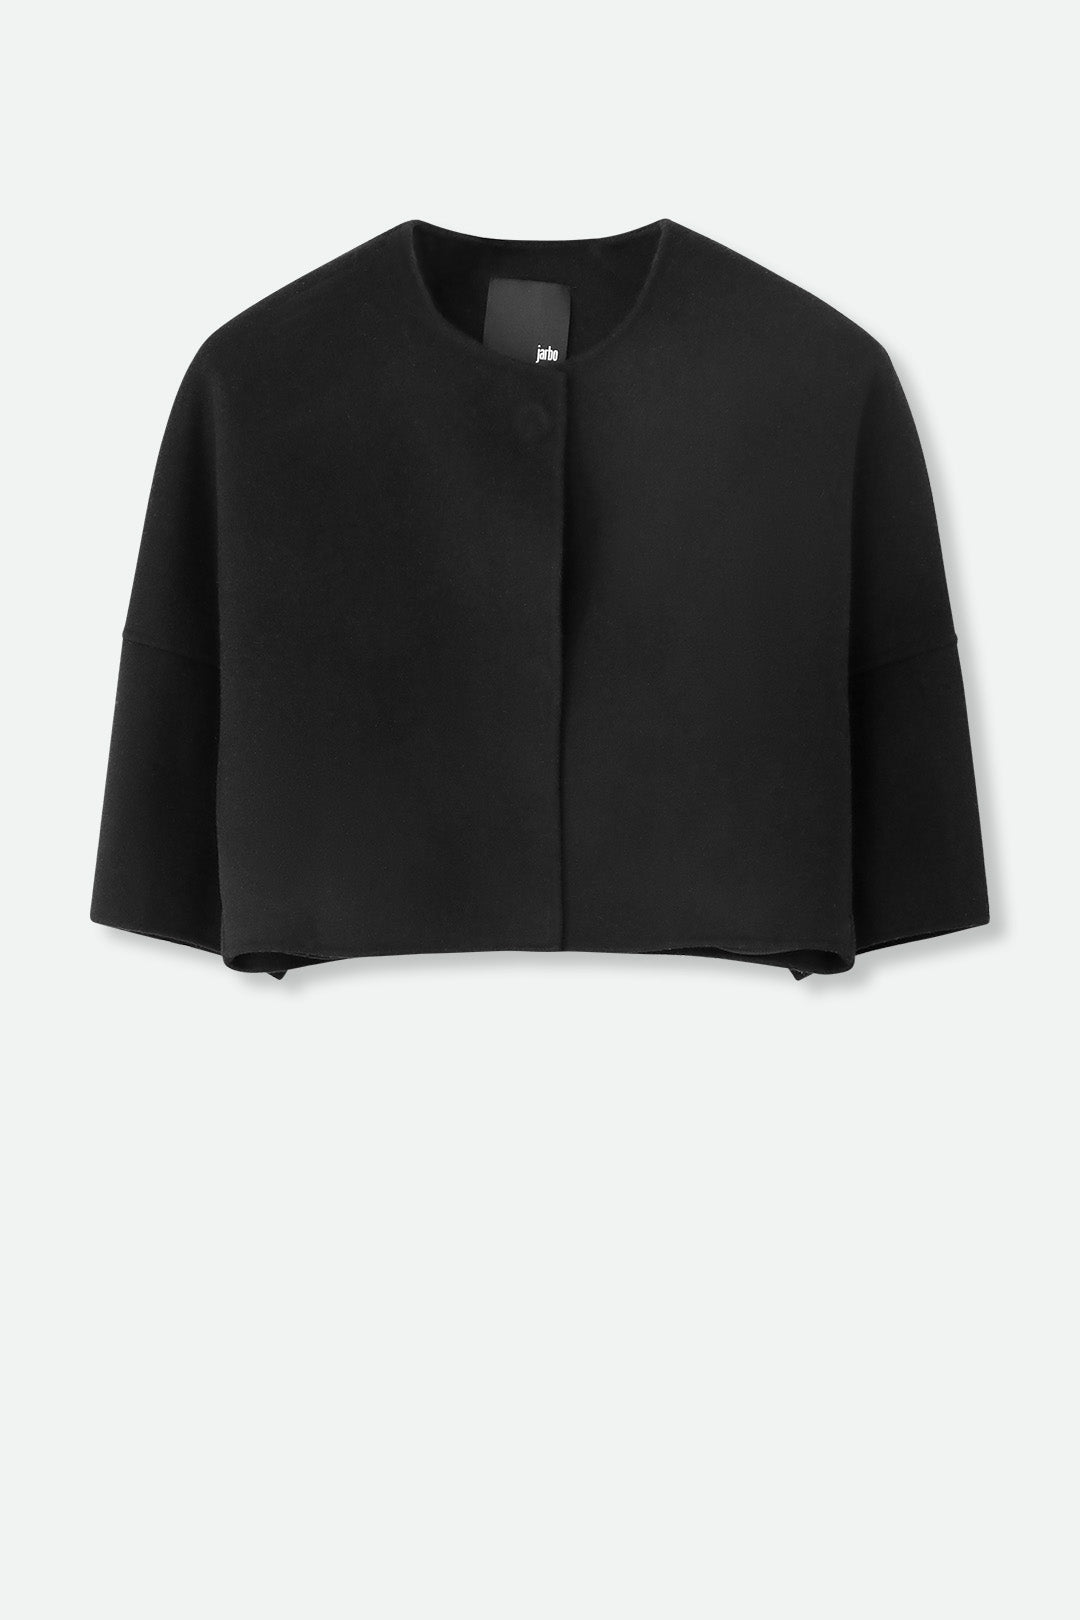 ADELAIDE SNAP JACKET IN DOUBLE-FACE CASHMERE WOOL - Jarbo